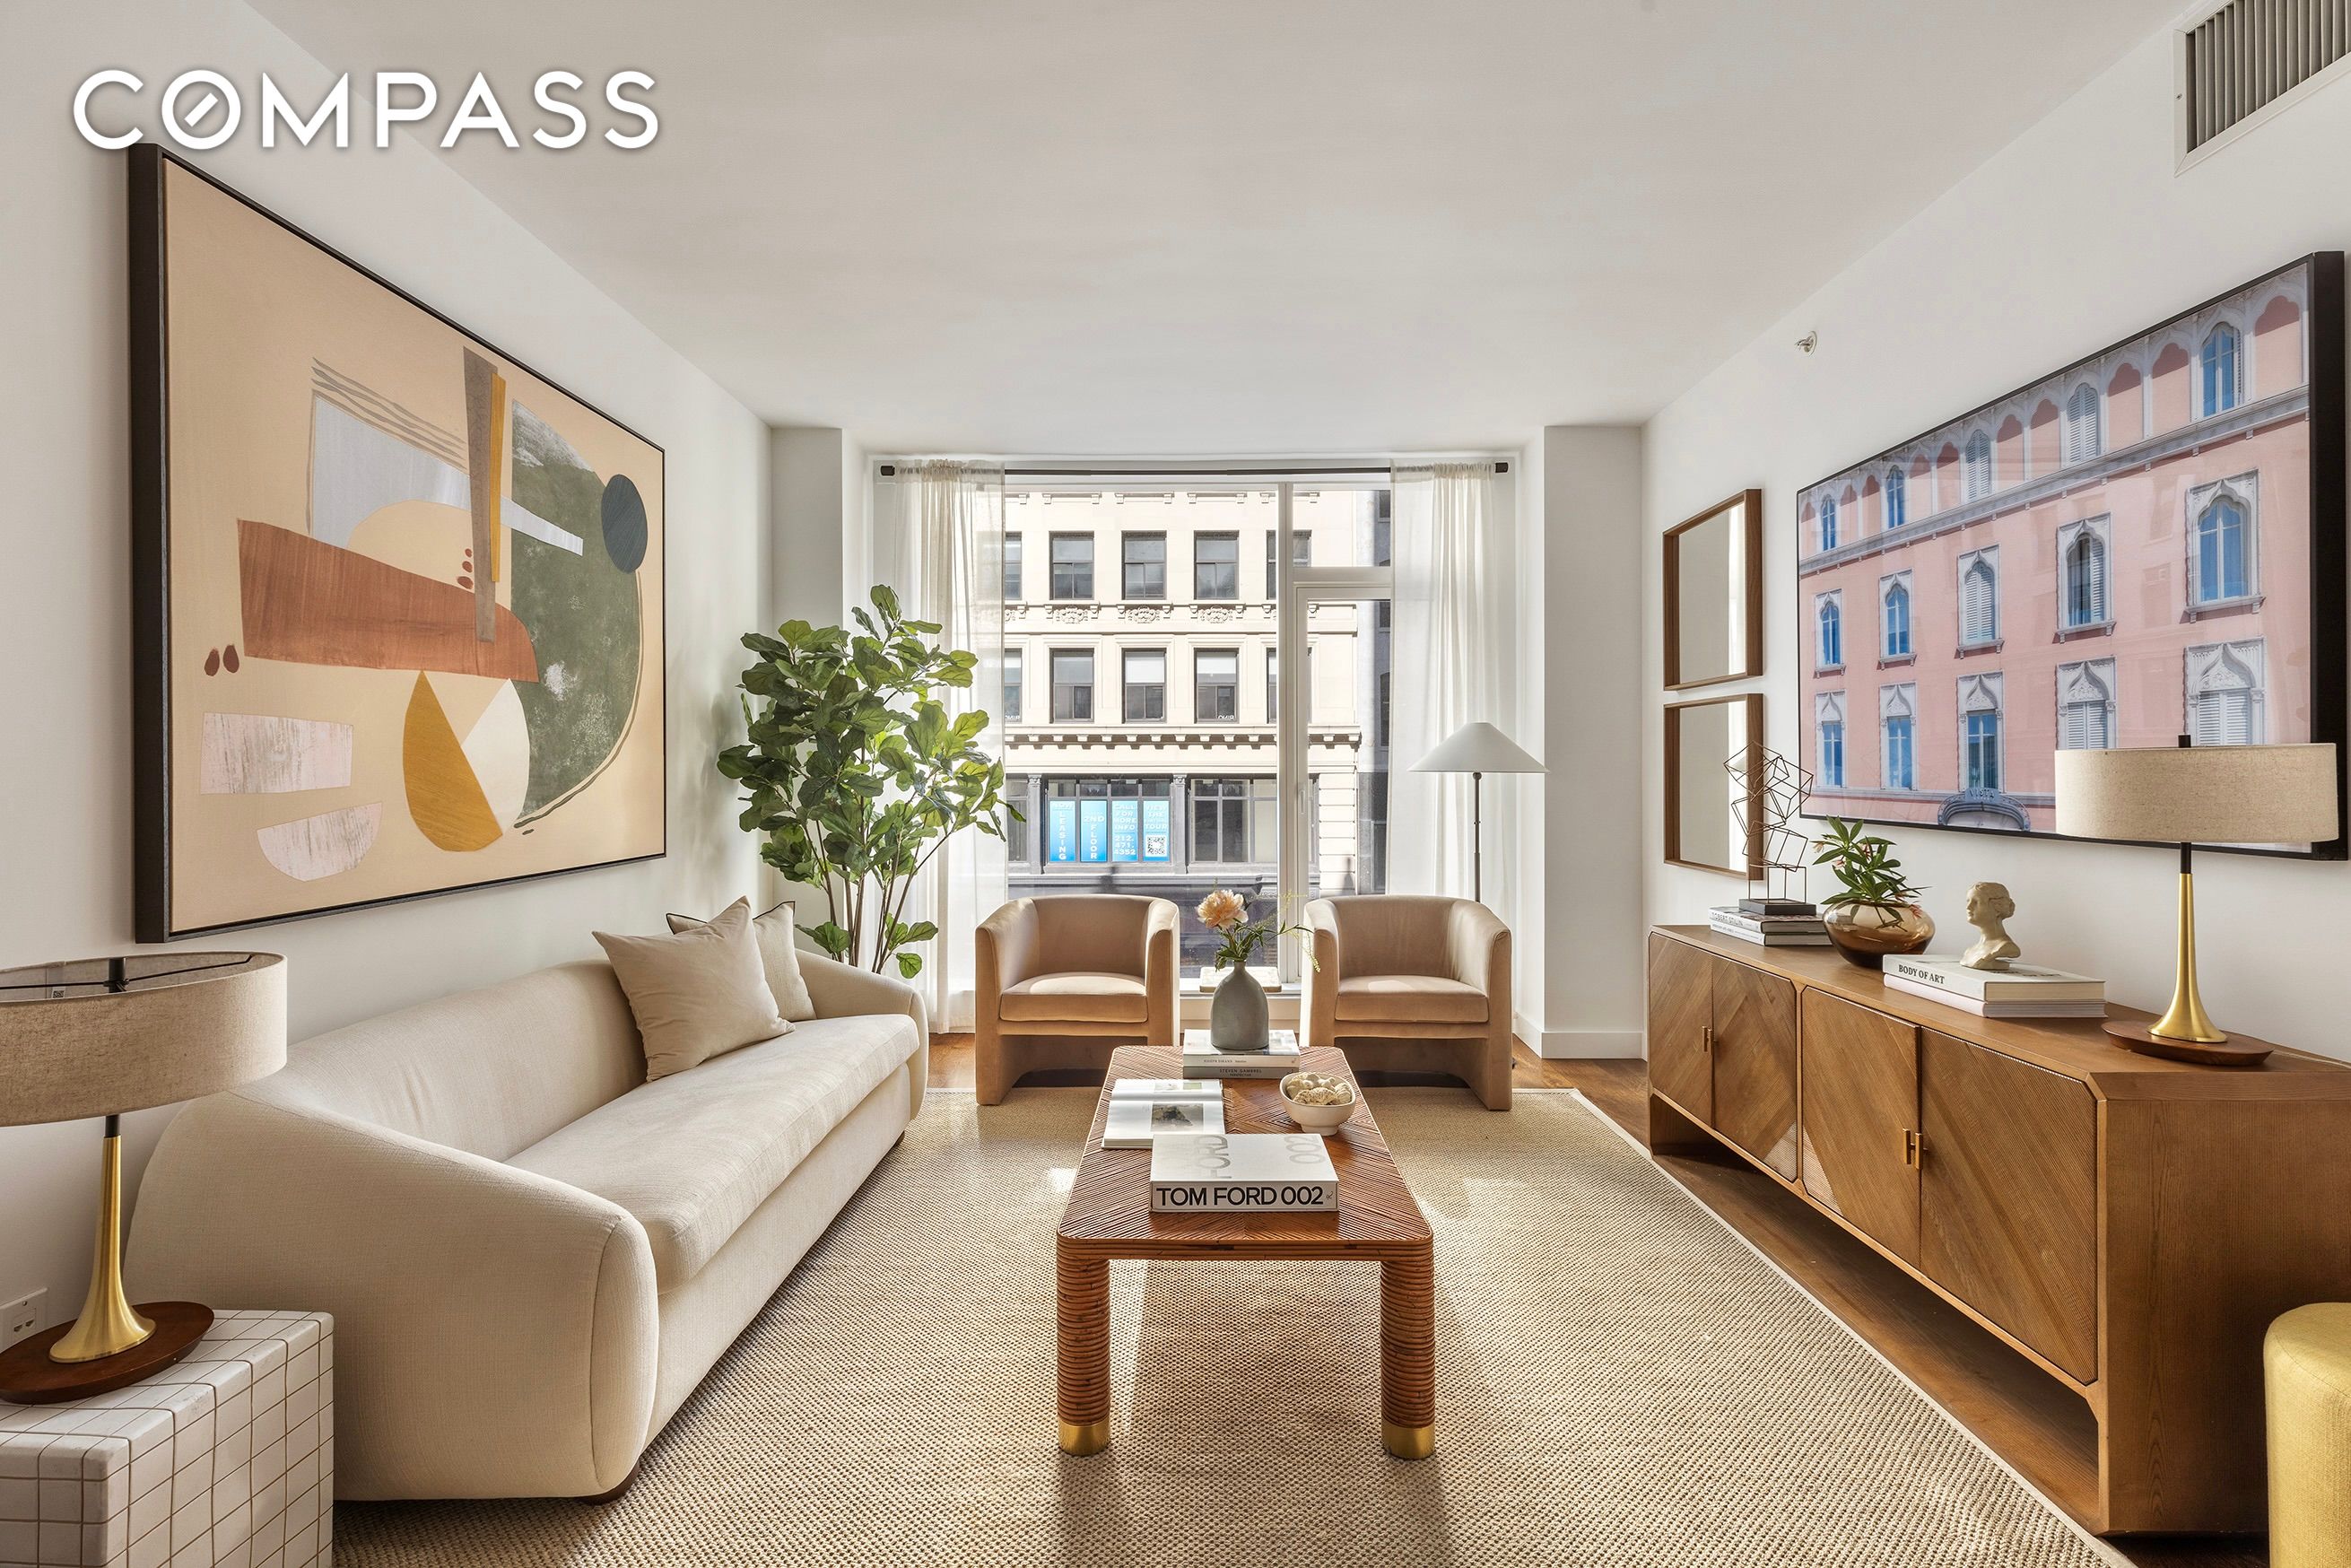 241 5th Avenue 3B, Nomad, Downtown, NYC - 3 Bedrooms  
3.5 Bathrooms  
5 Rooms - 